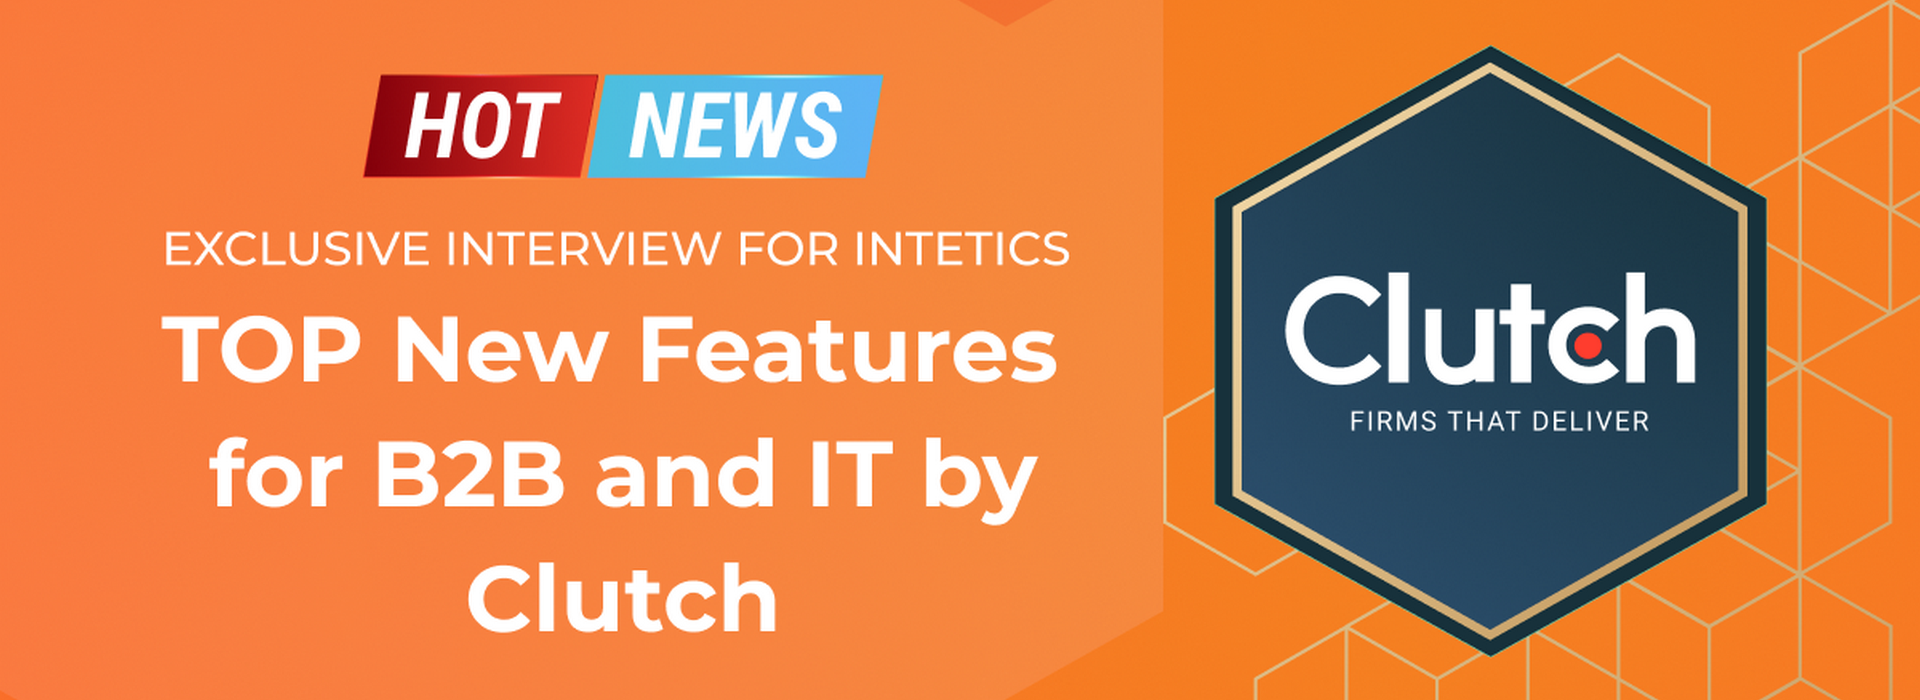 Hot News! Top Breakthrough Updates for IT Industry by Clutch: Exclusive Interview for Intetics